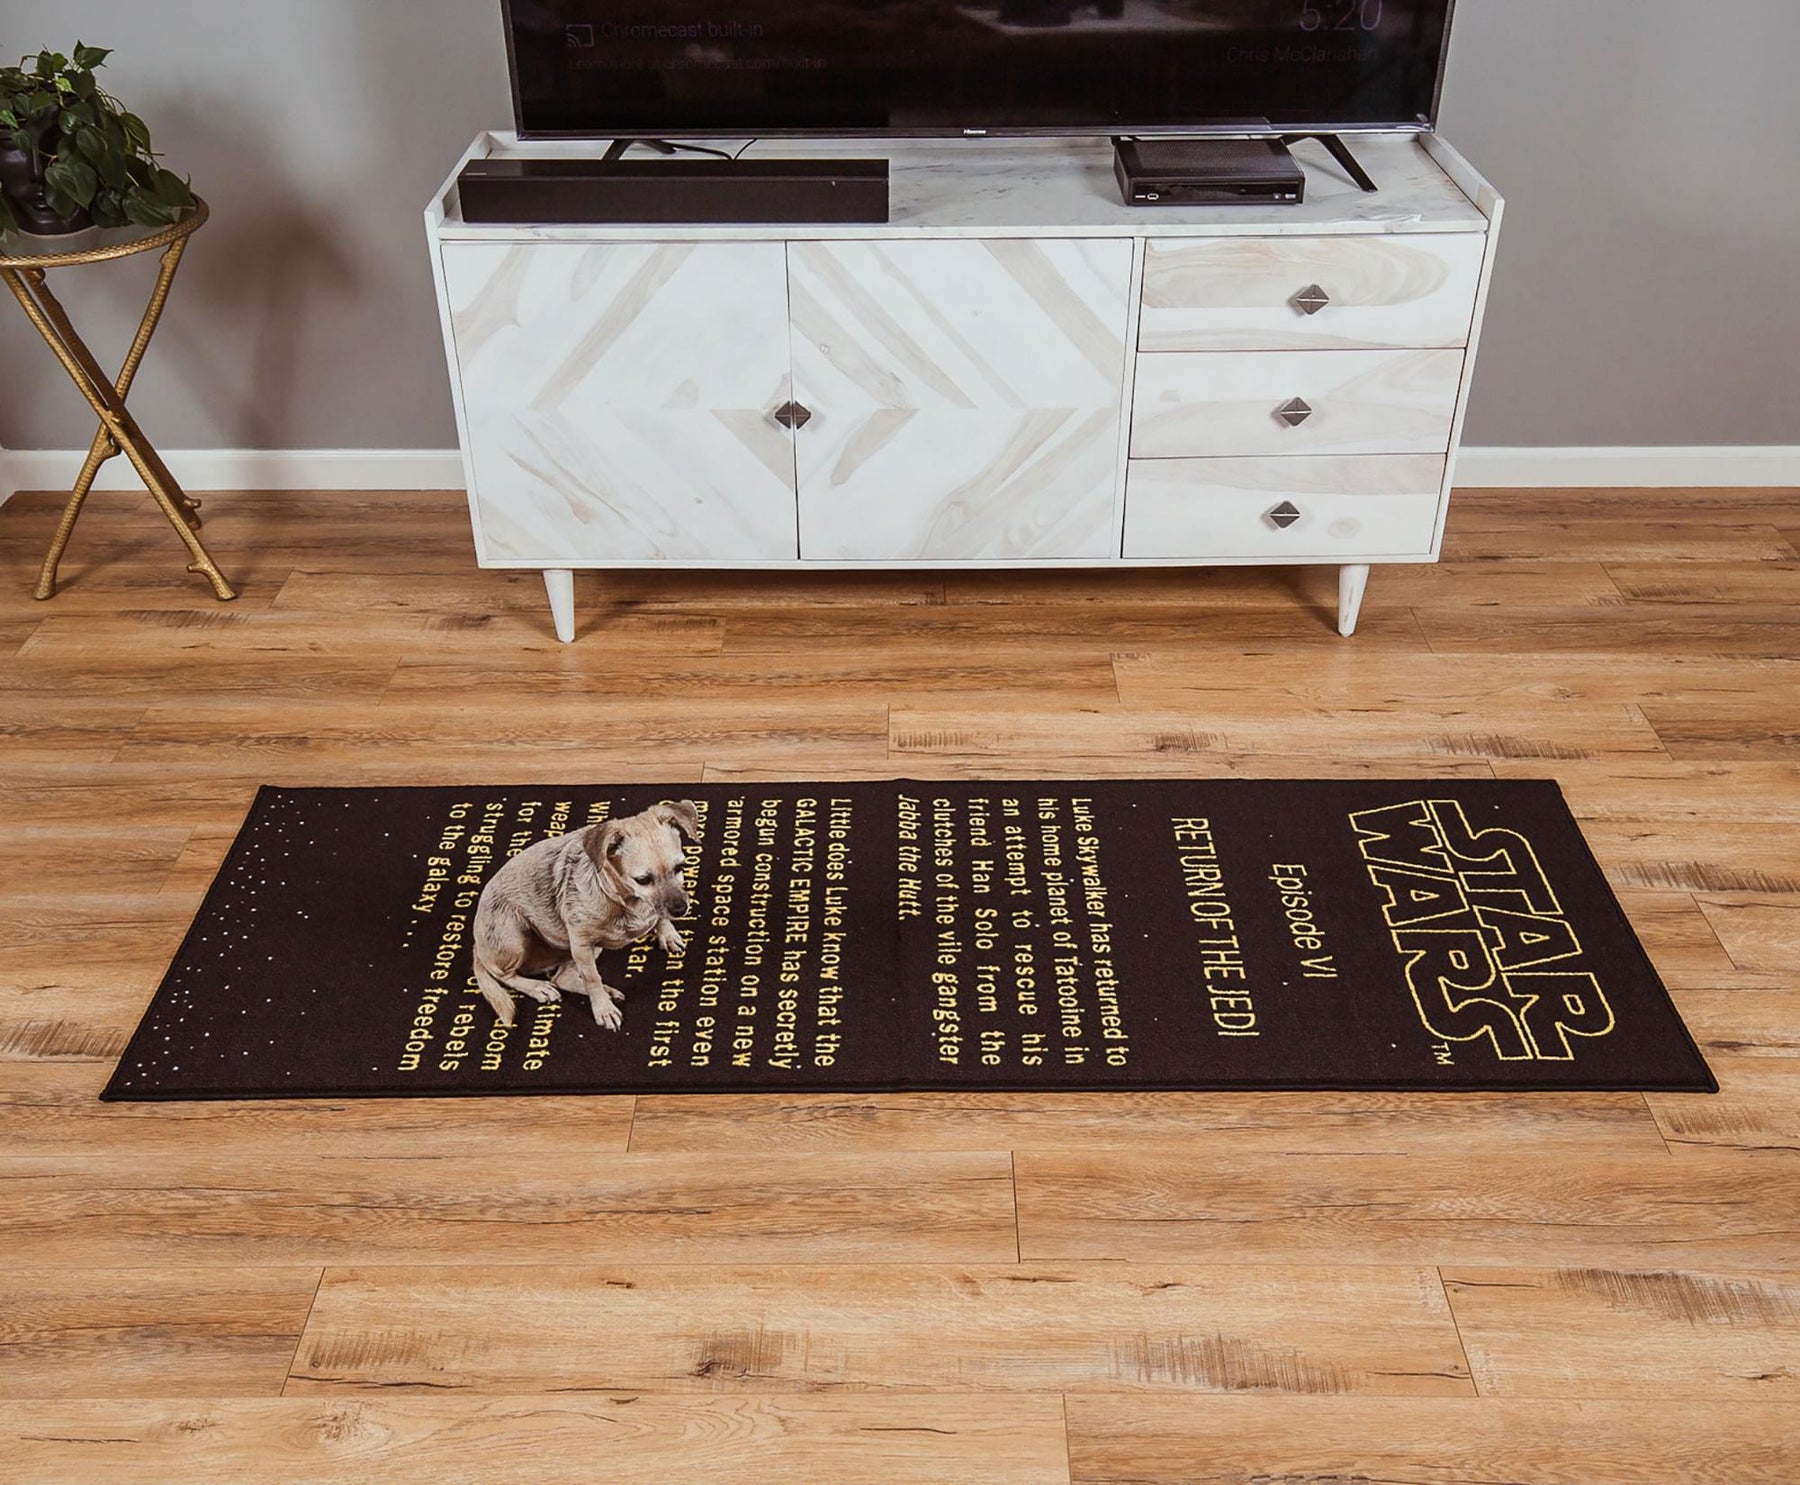 Star Wars: Return of the Jedi Title Crawl Printed Area Rug | 27 x 77 Inches